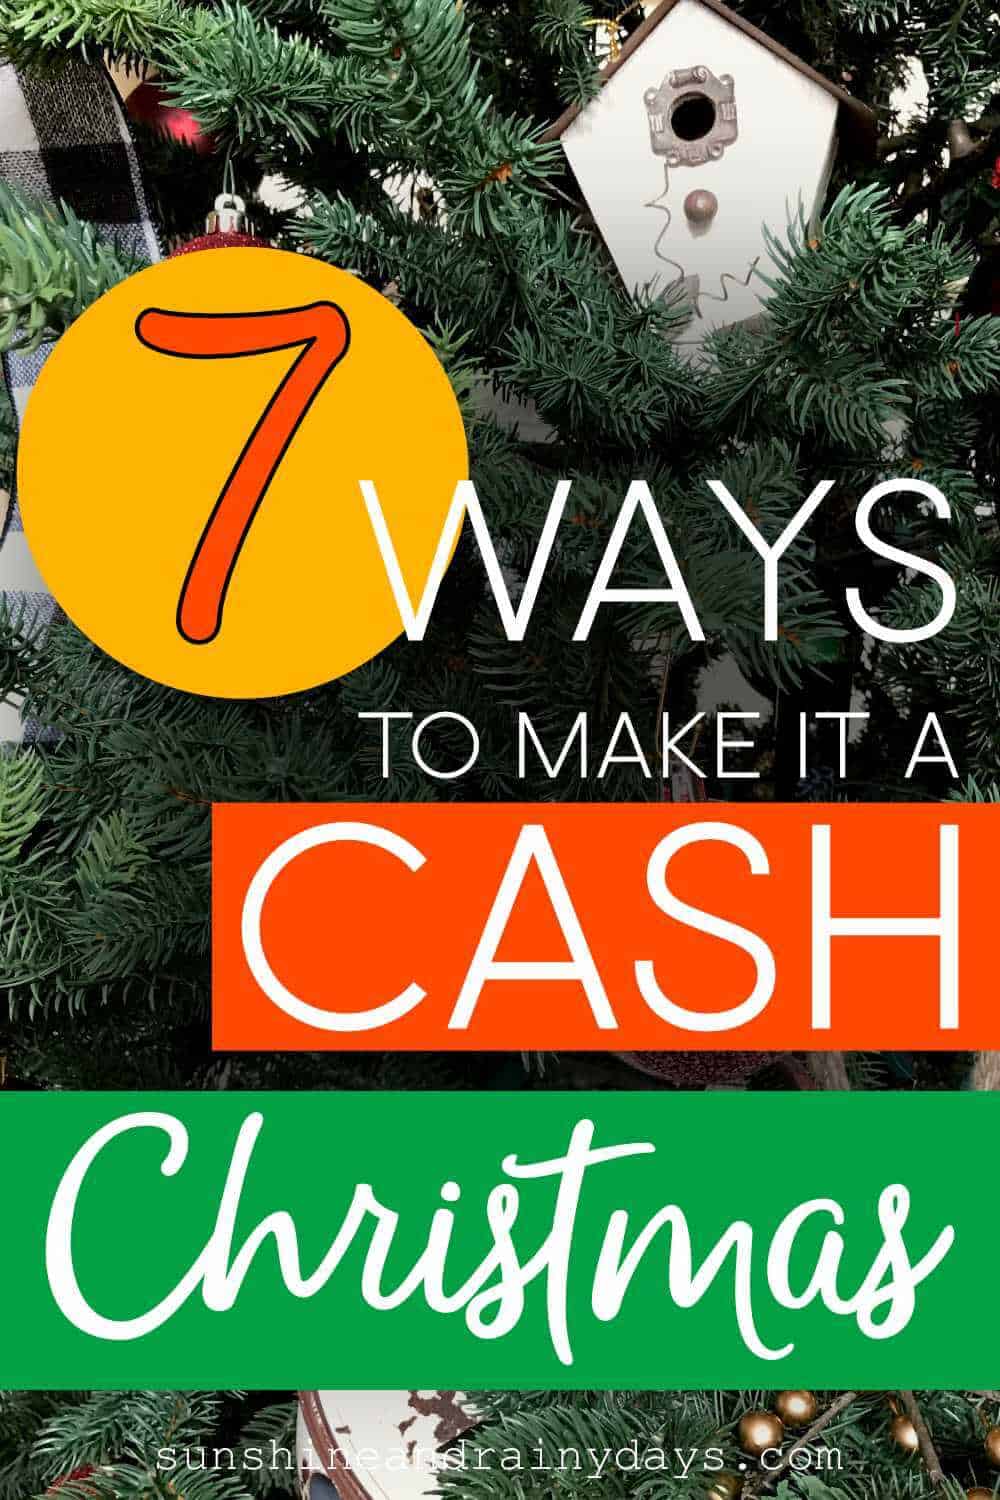 Christmas Tree with the words: 7 Ways To Make It A Cash Christmas